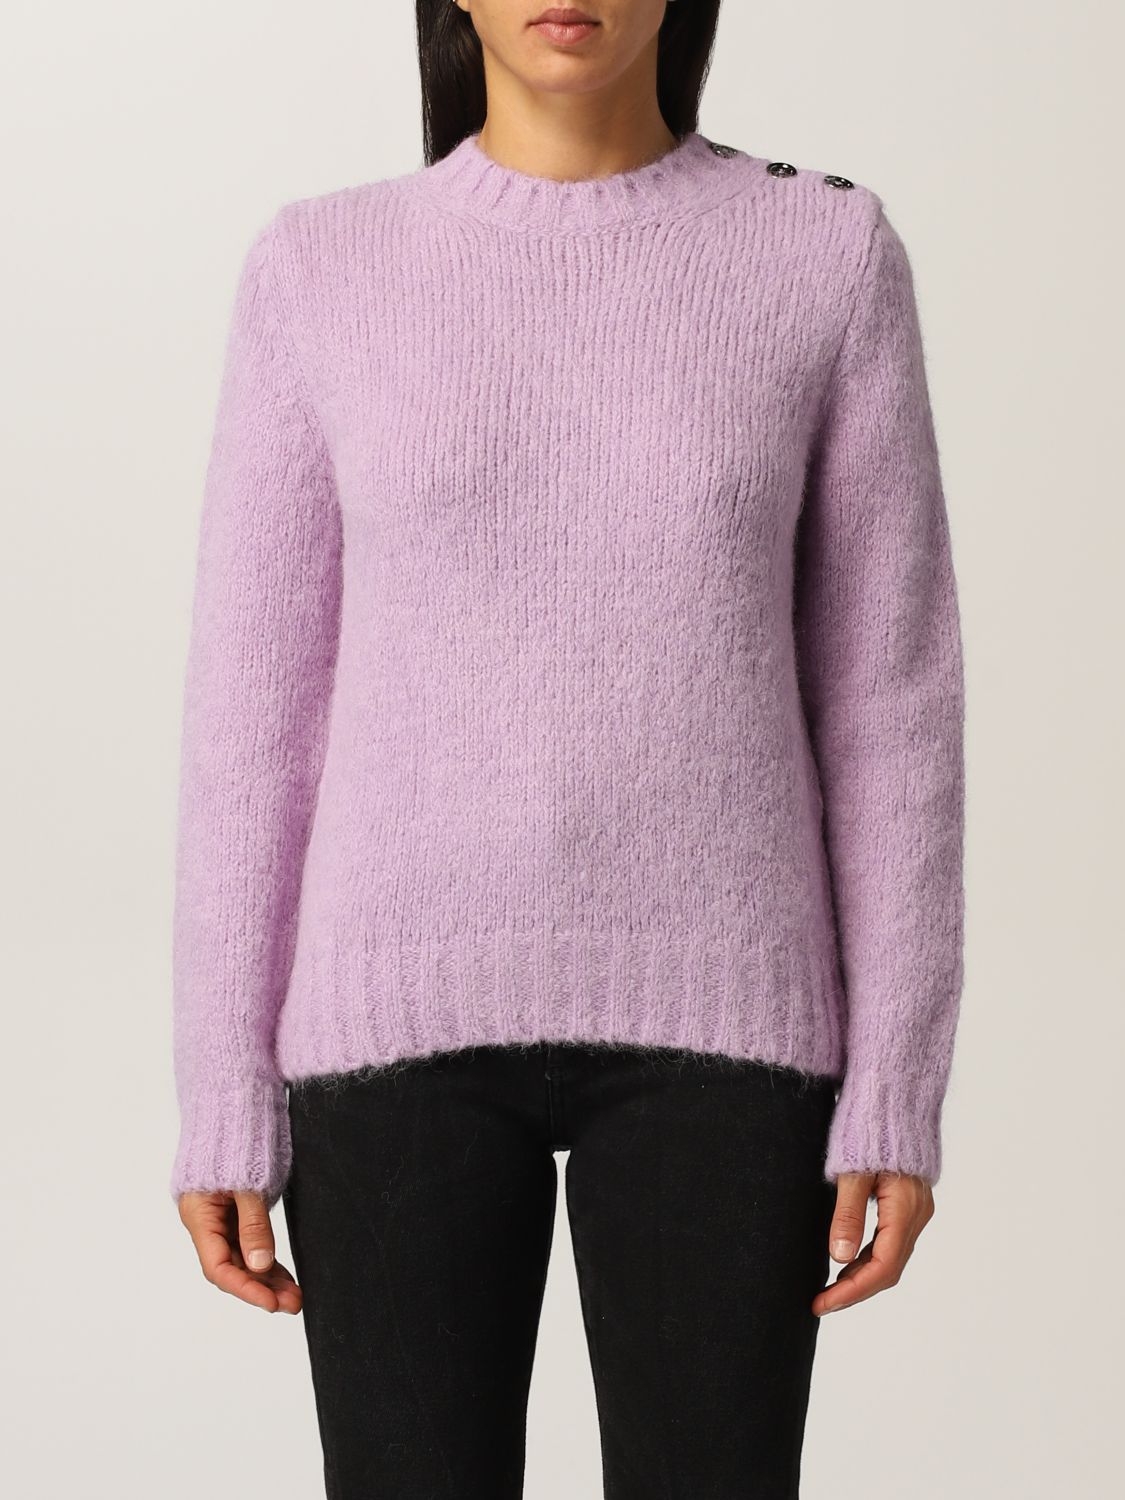 deeply interface Chip A.p.c. Outlet: Damen Pullover - Lila | A.p.c. Pullover WPAASF23086 online  auf GIGLIO.COM